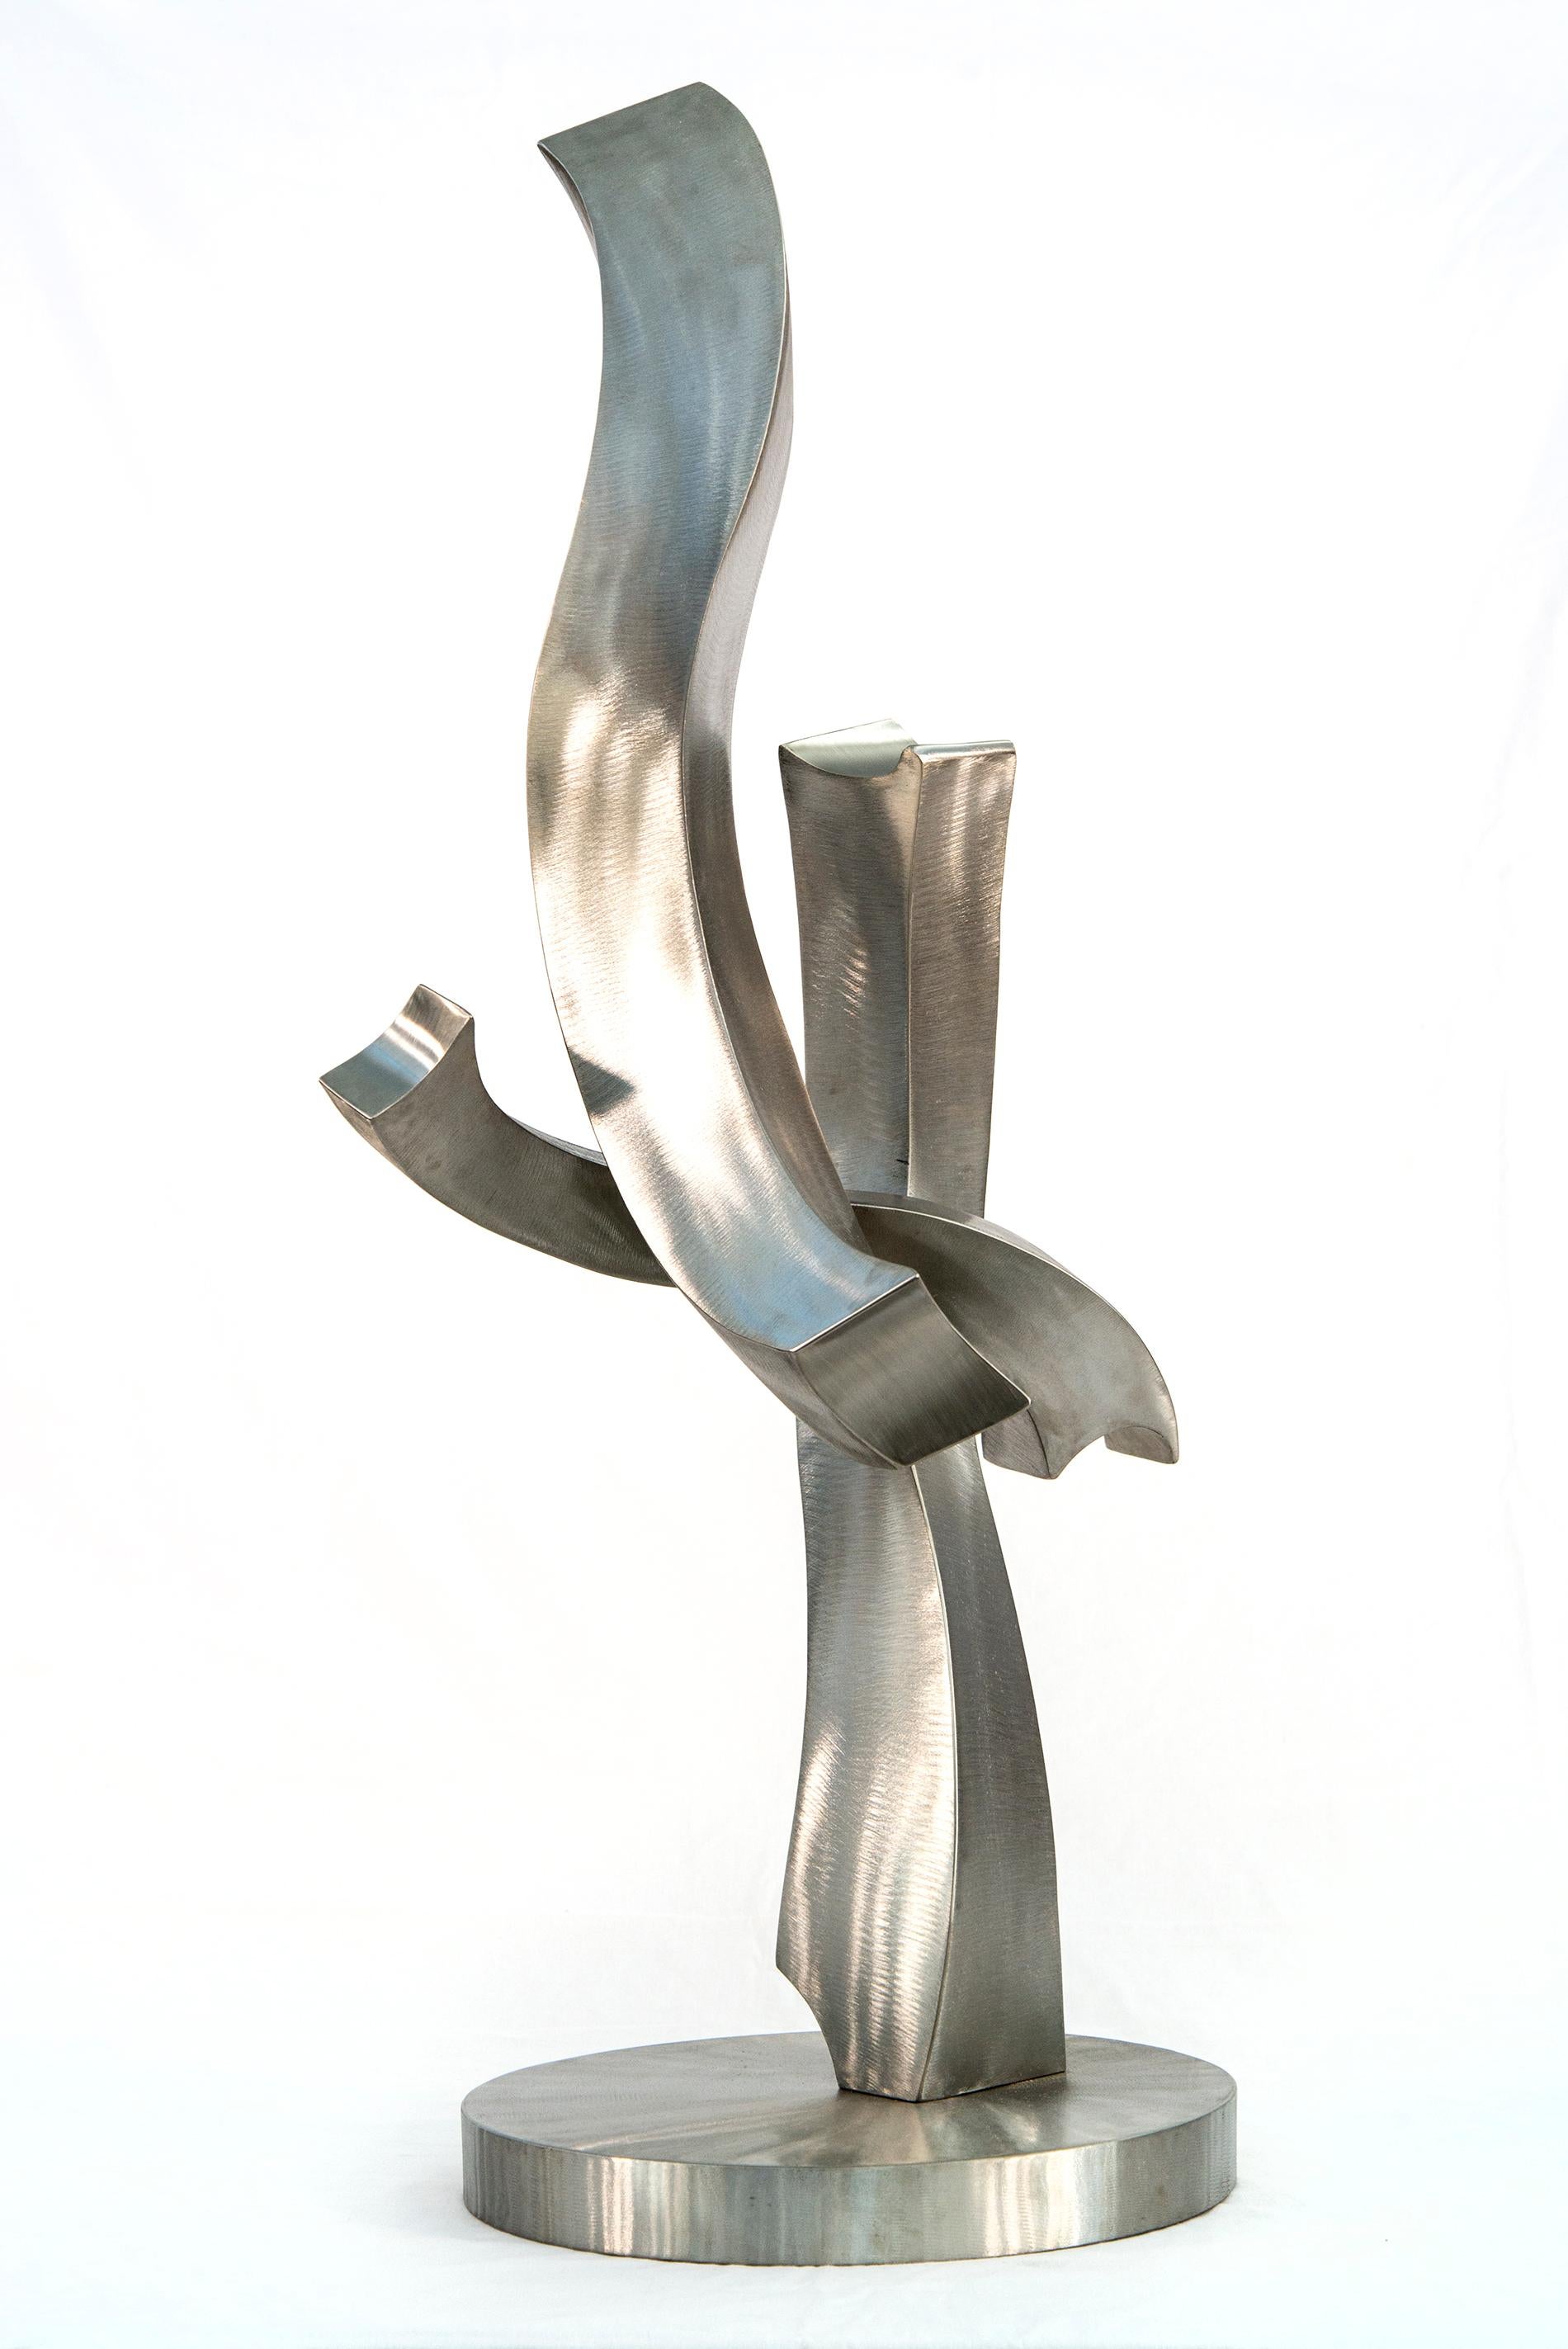 A Glimpse of Fun - contemporary, abstract, forged stainless steel sculpture - Sculpture by Kevin Robb